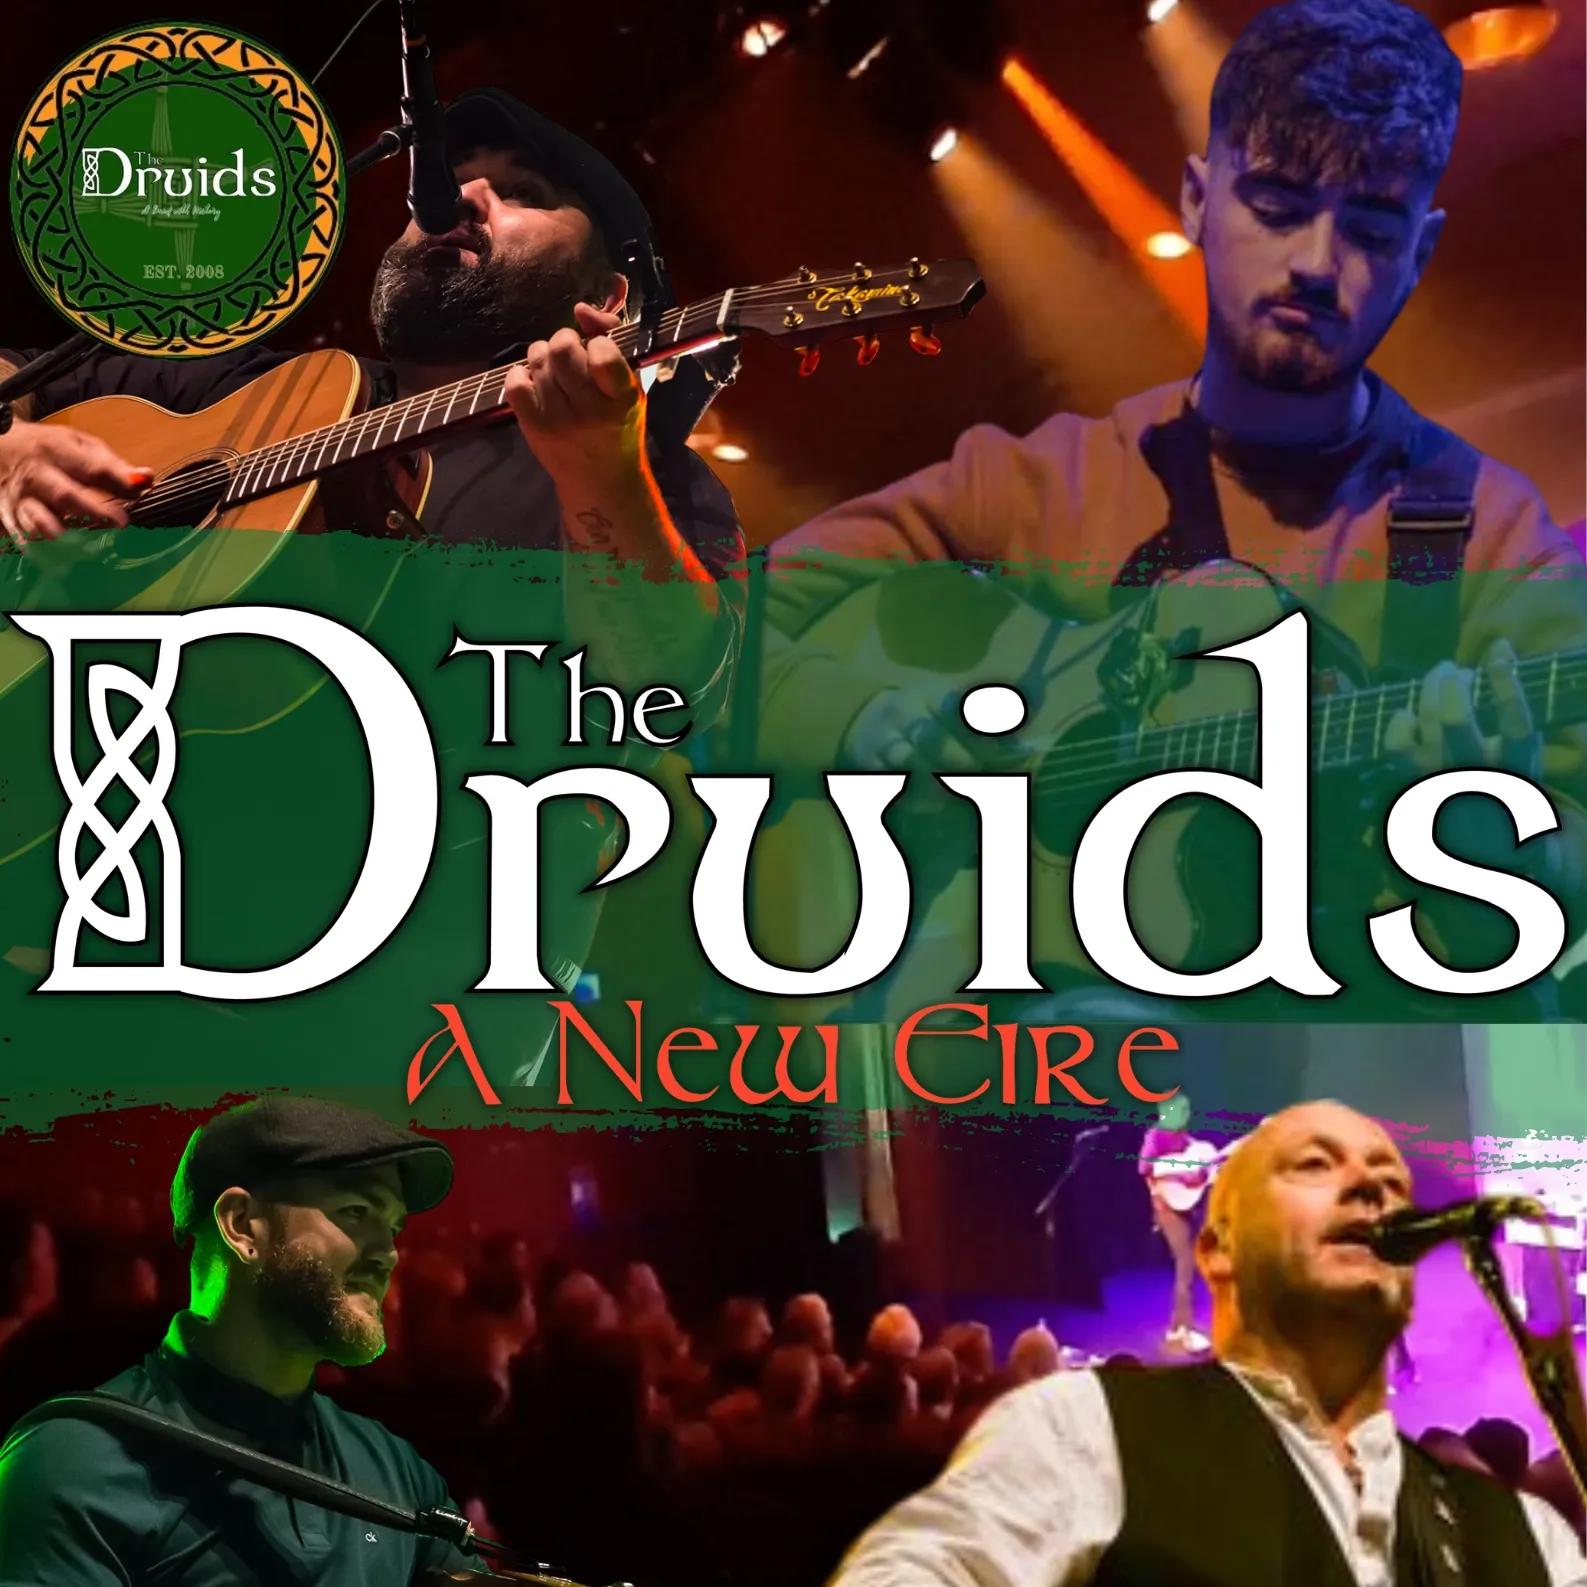 The DRUIDS group Tour of Ireland - background banner